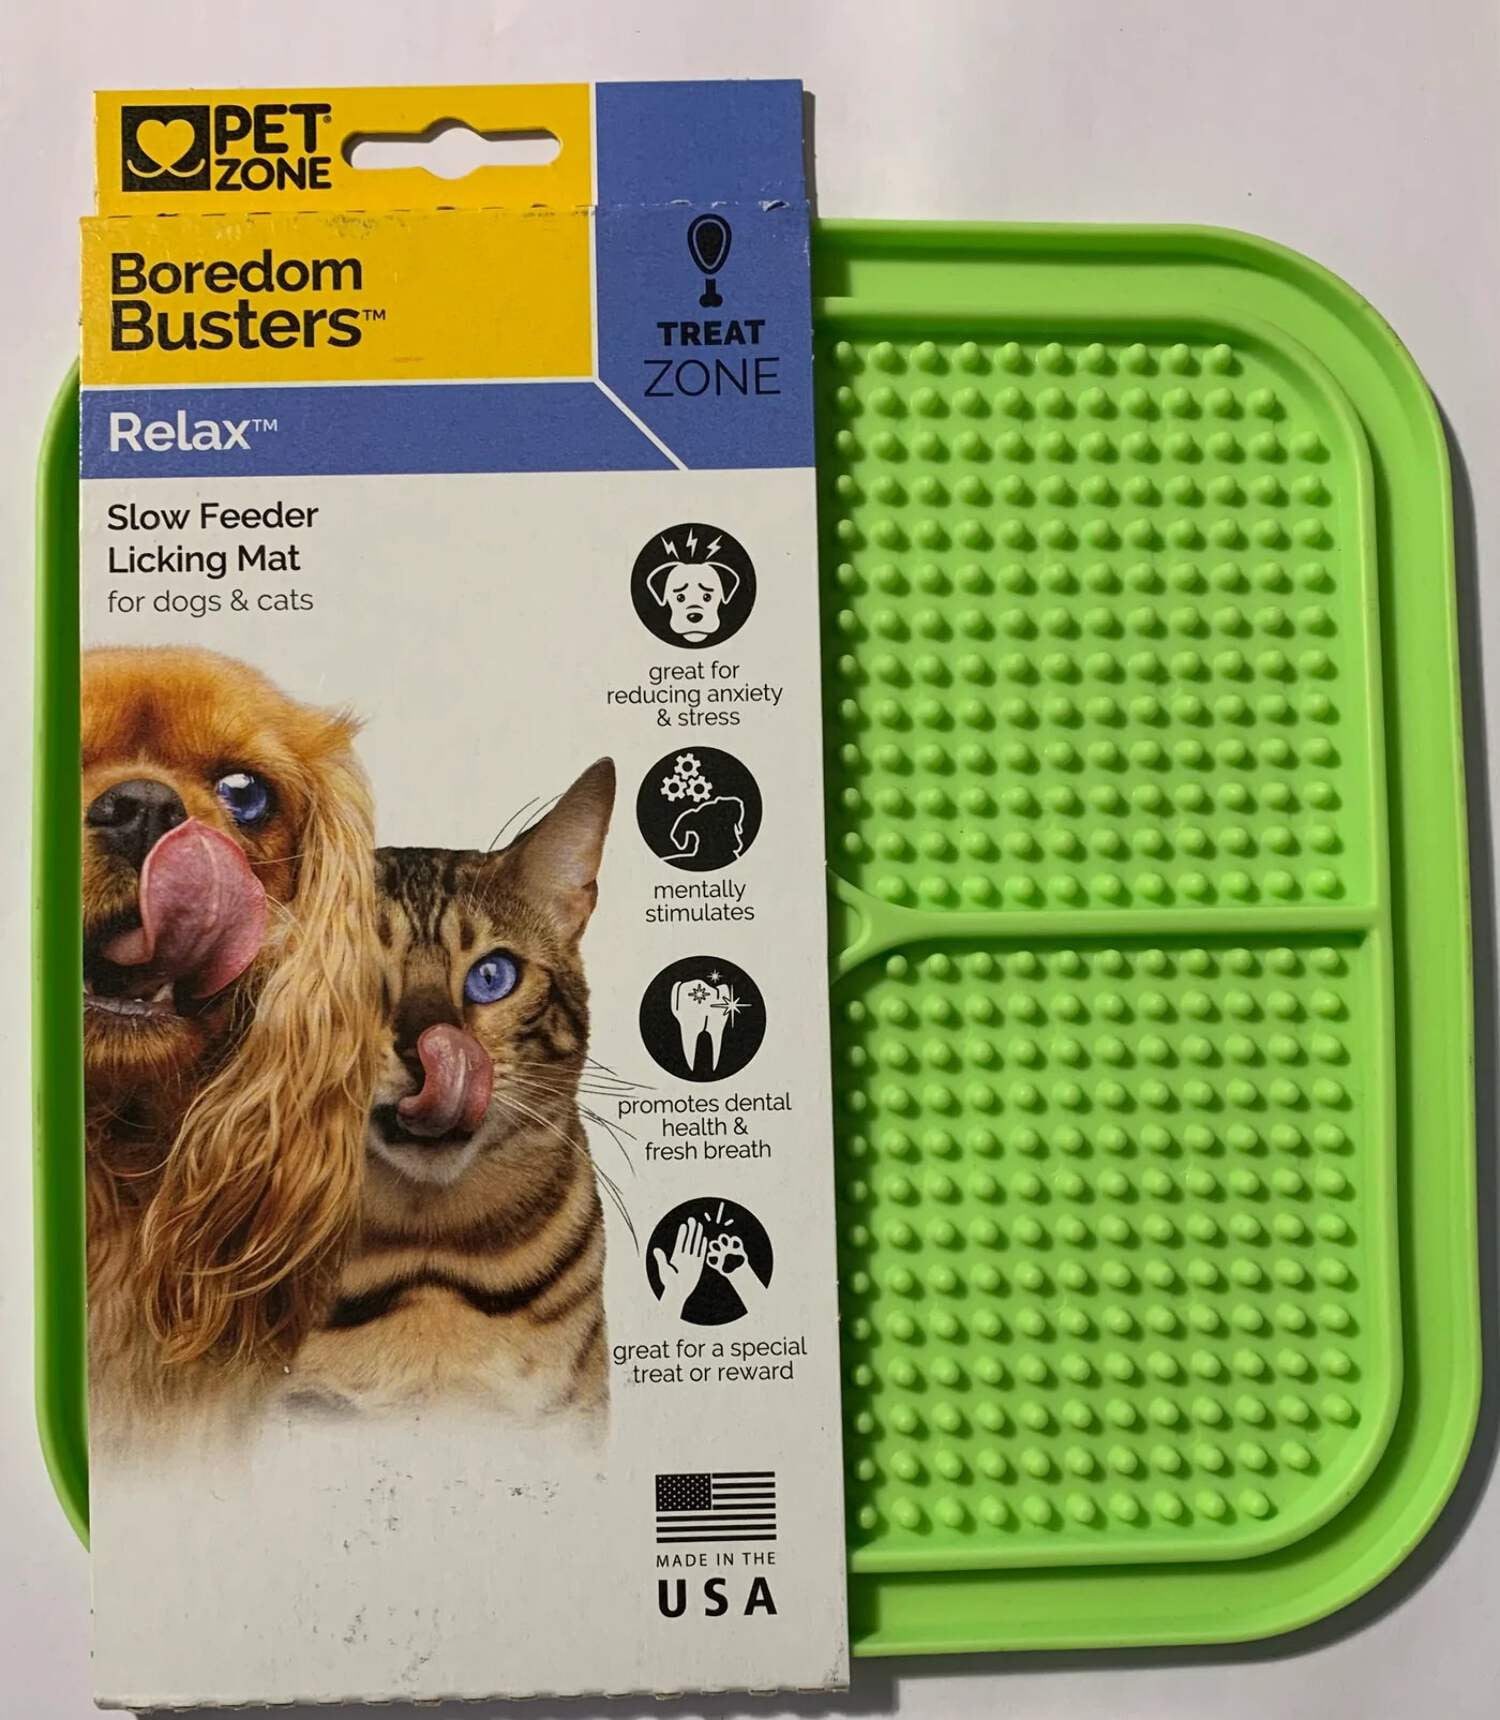 Staff Picks - Boredom Busters for Dogs and Cats